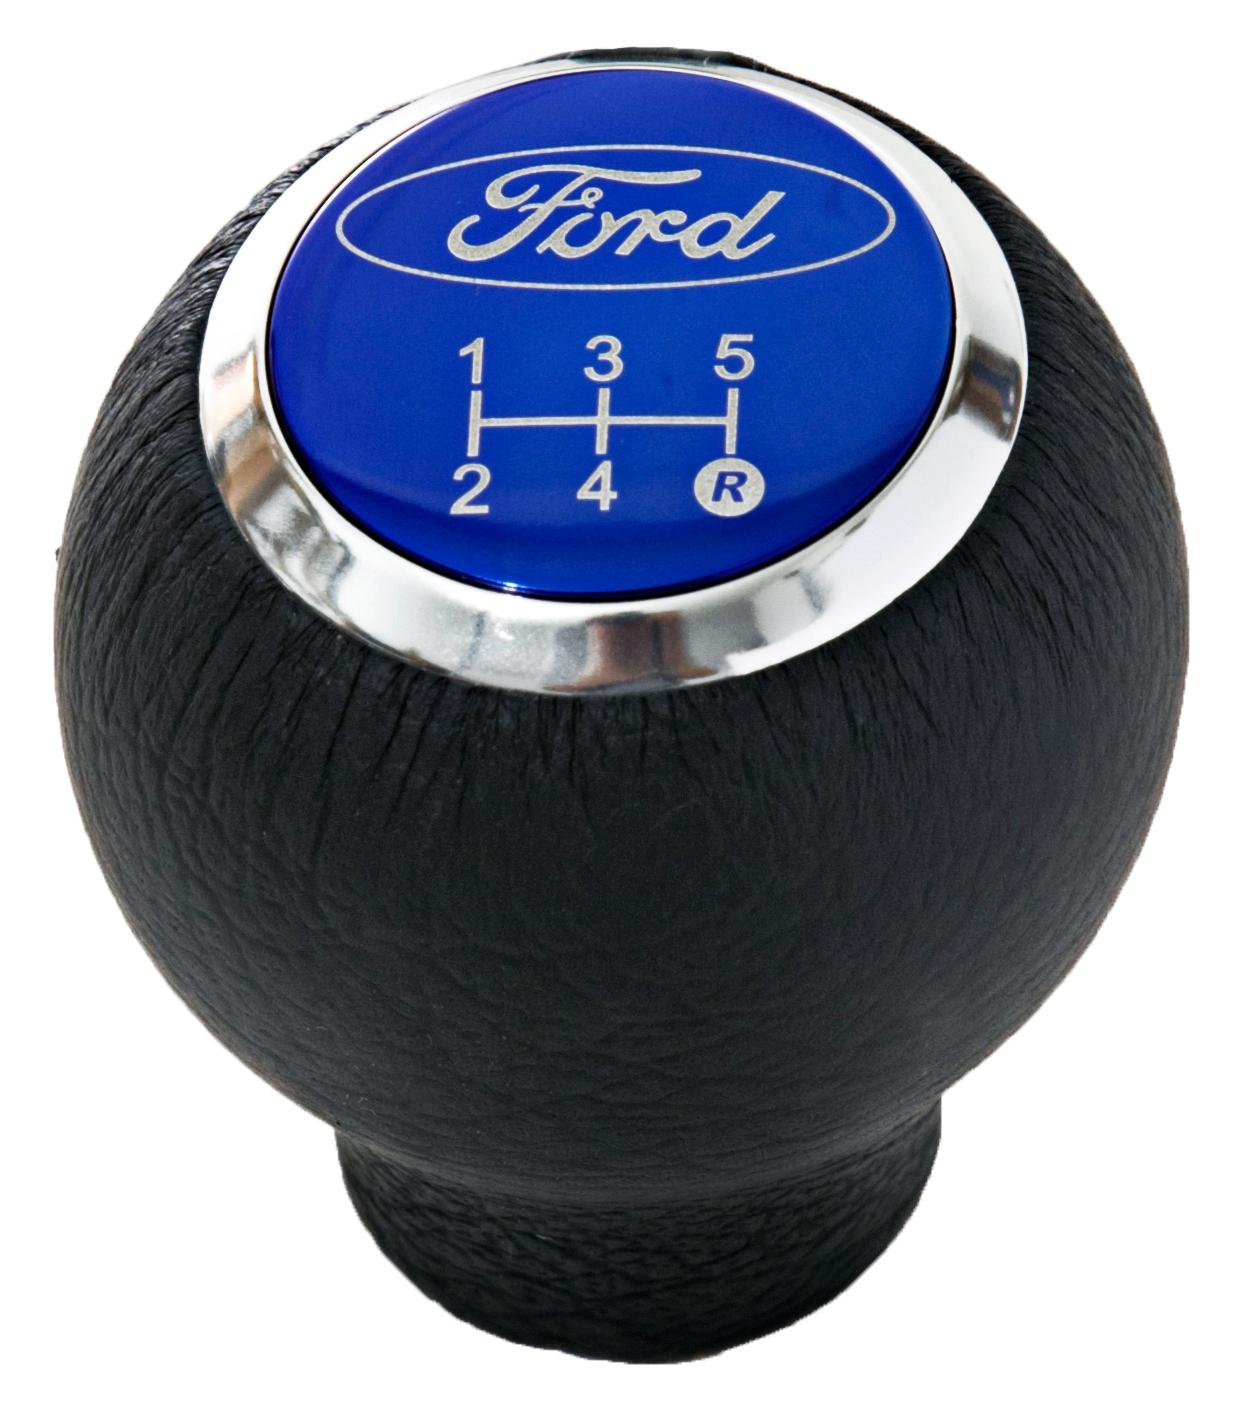 Richbrook Ford Leather Gear Knob